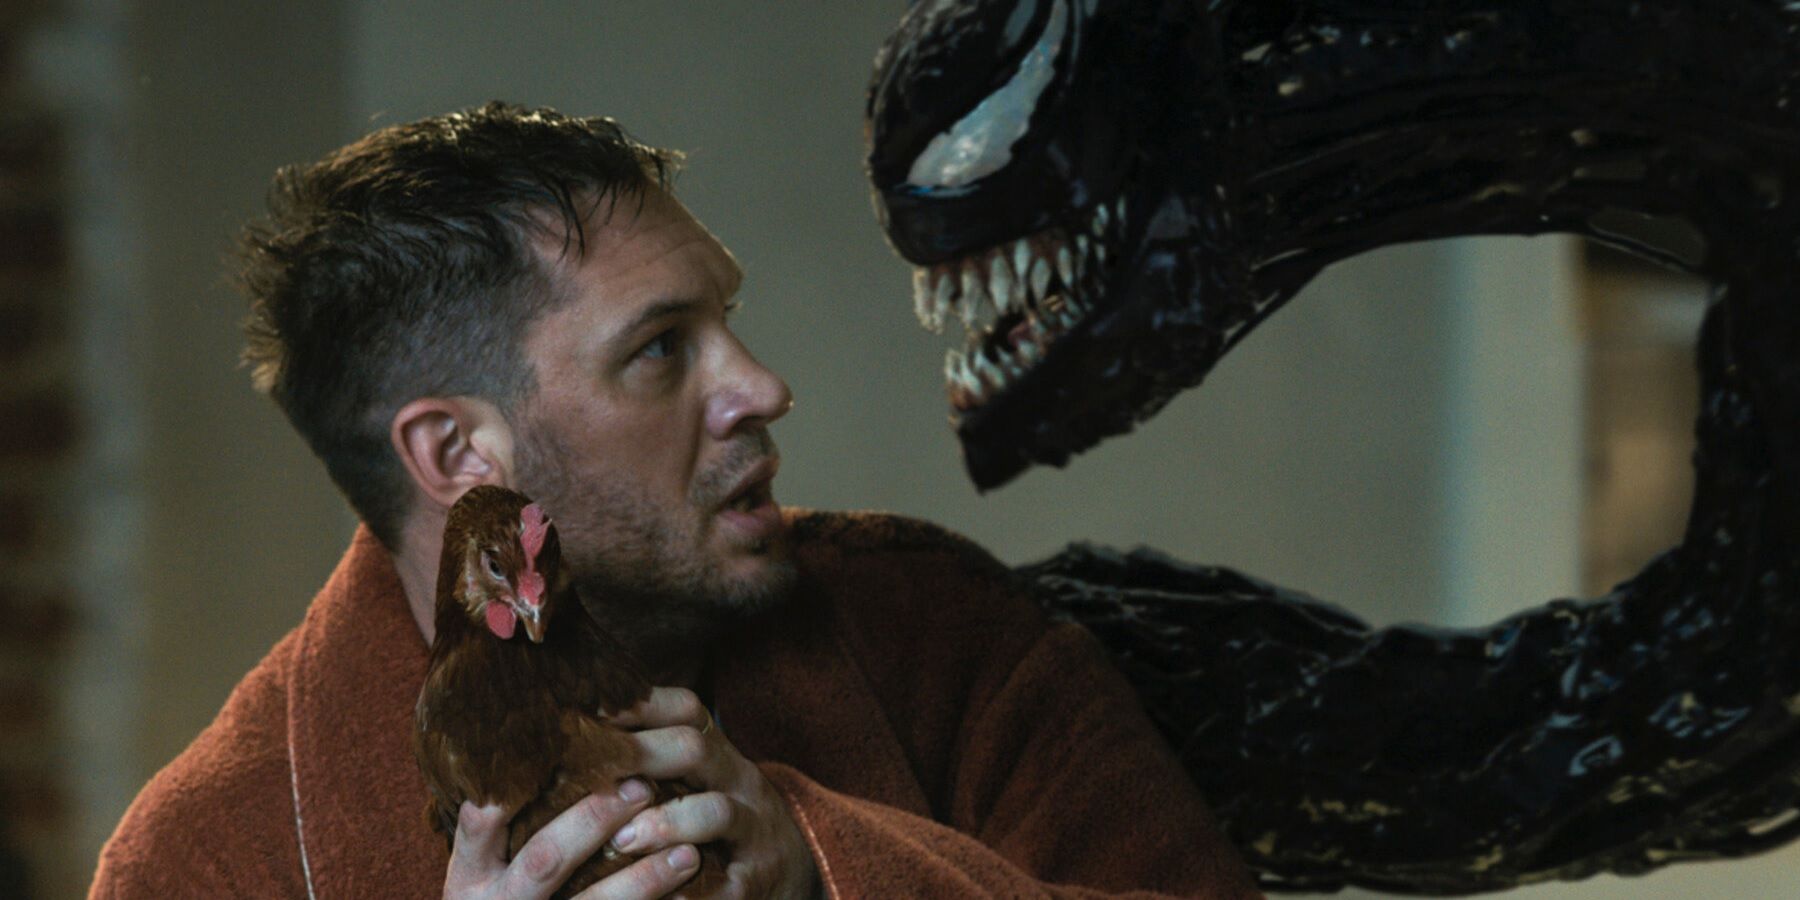 Eddie protects a chicken from Venom in Venom Let There Be Carnage